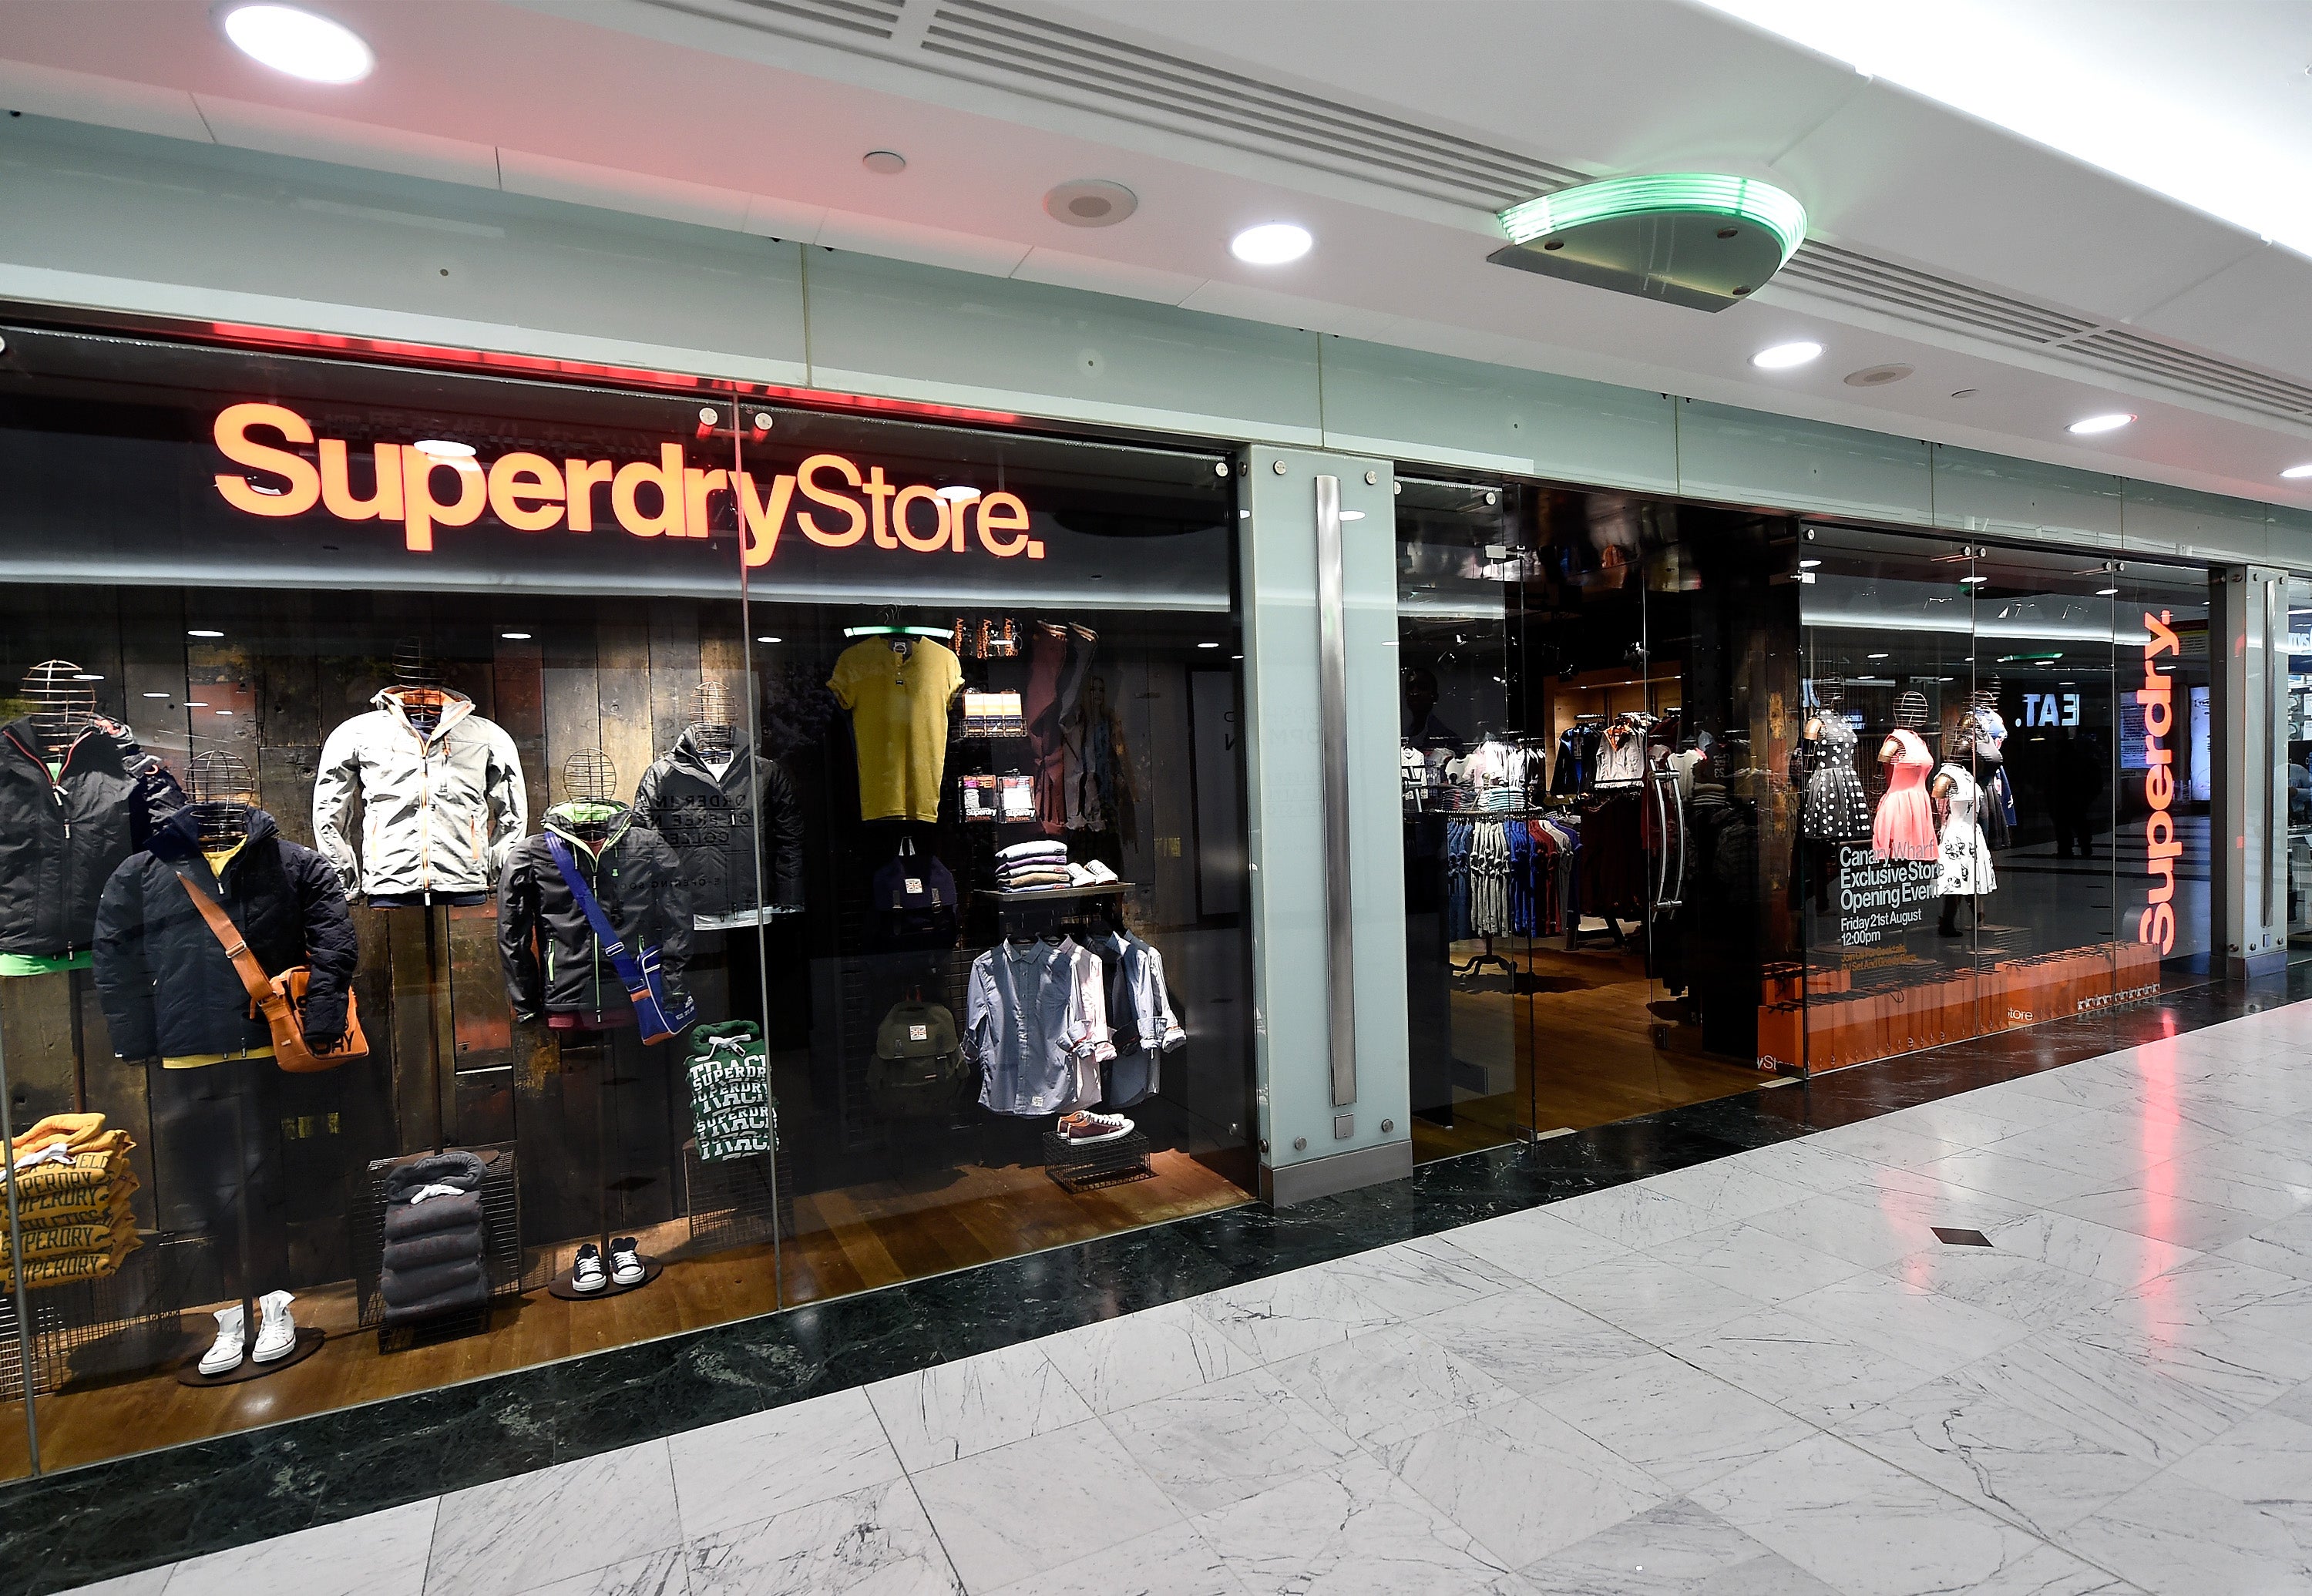 A Superdry store in London’s Canary Wharf